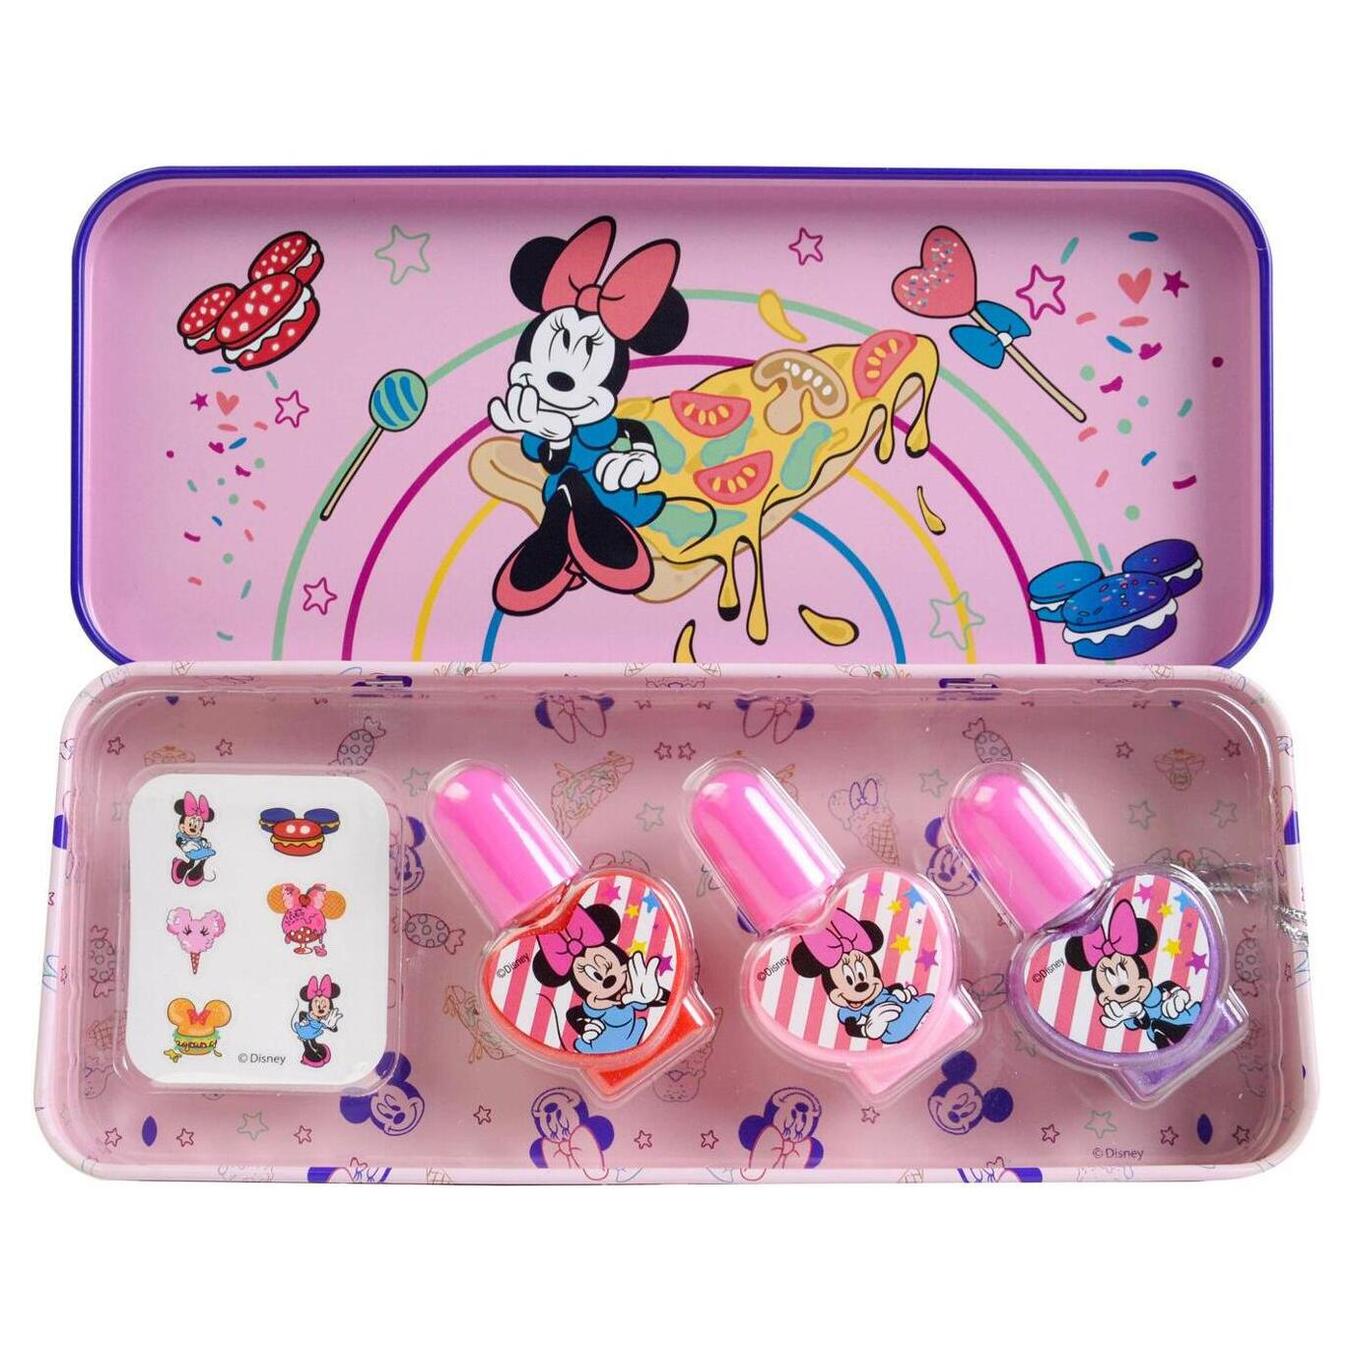 Cosmic Candy nail polish set in Minnie metal case